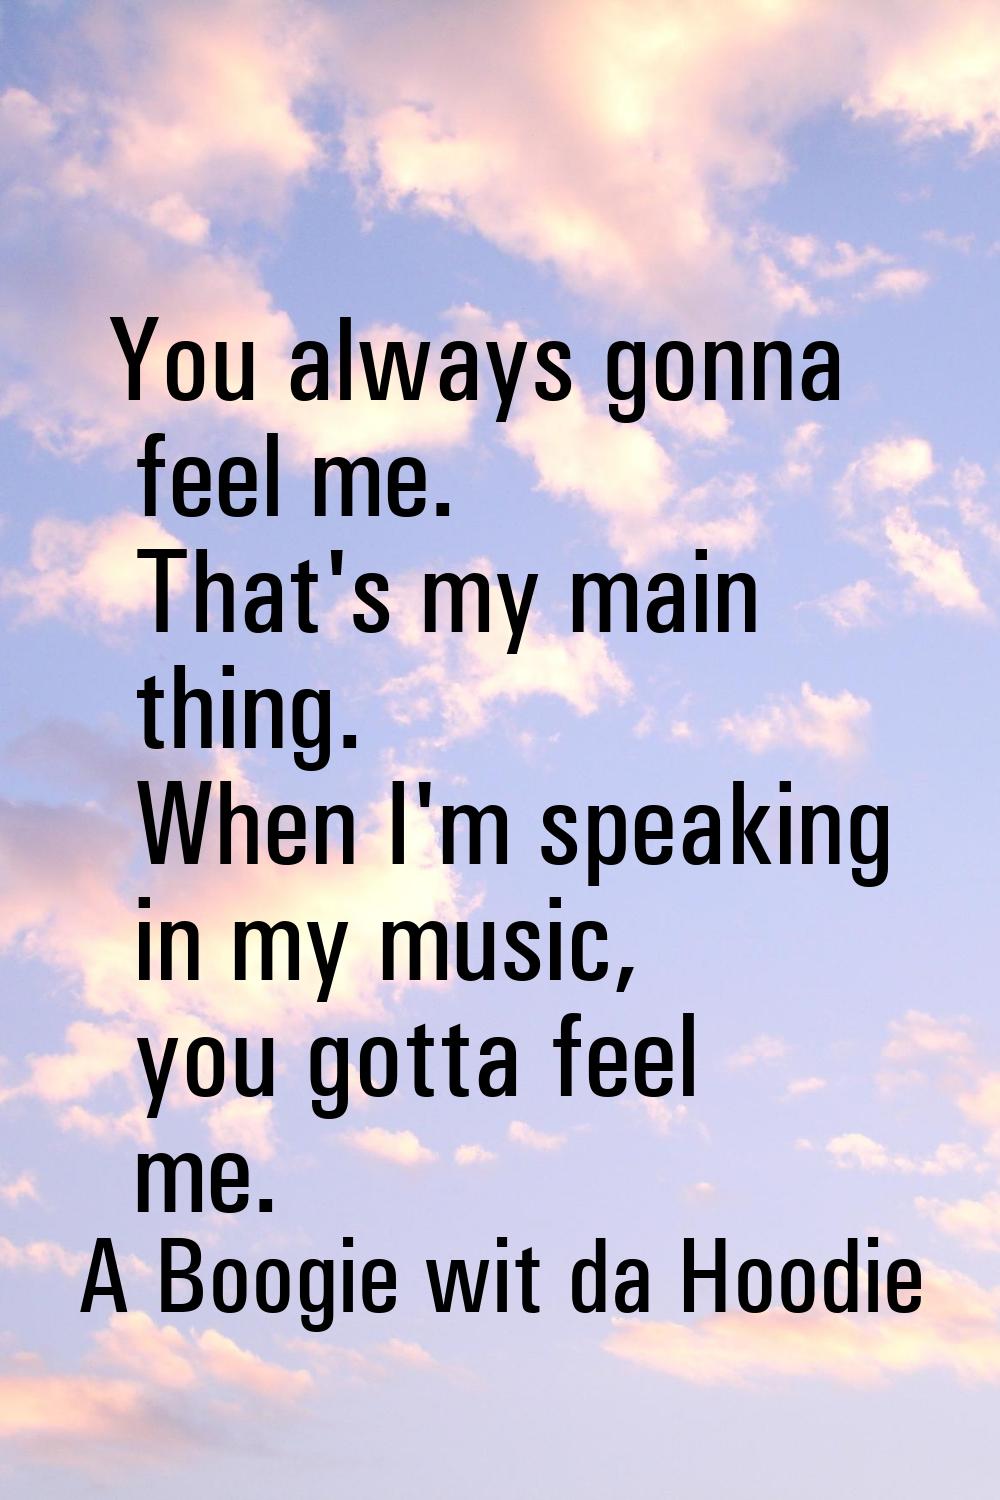 You always gonna feel me. That's my main thing. When I'm speaking in my music, you gotta feel me.